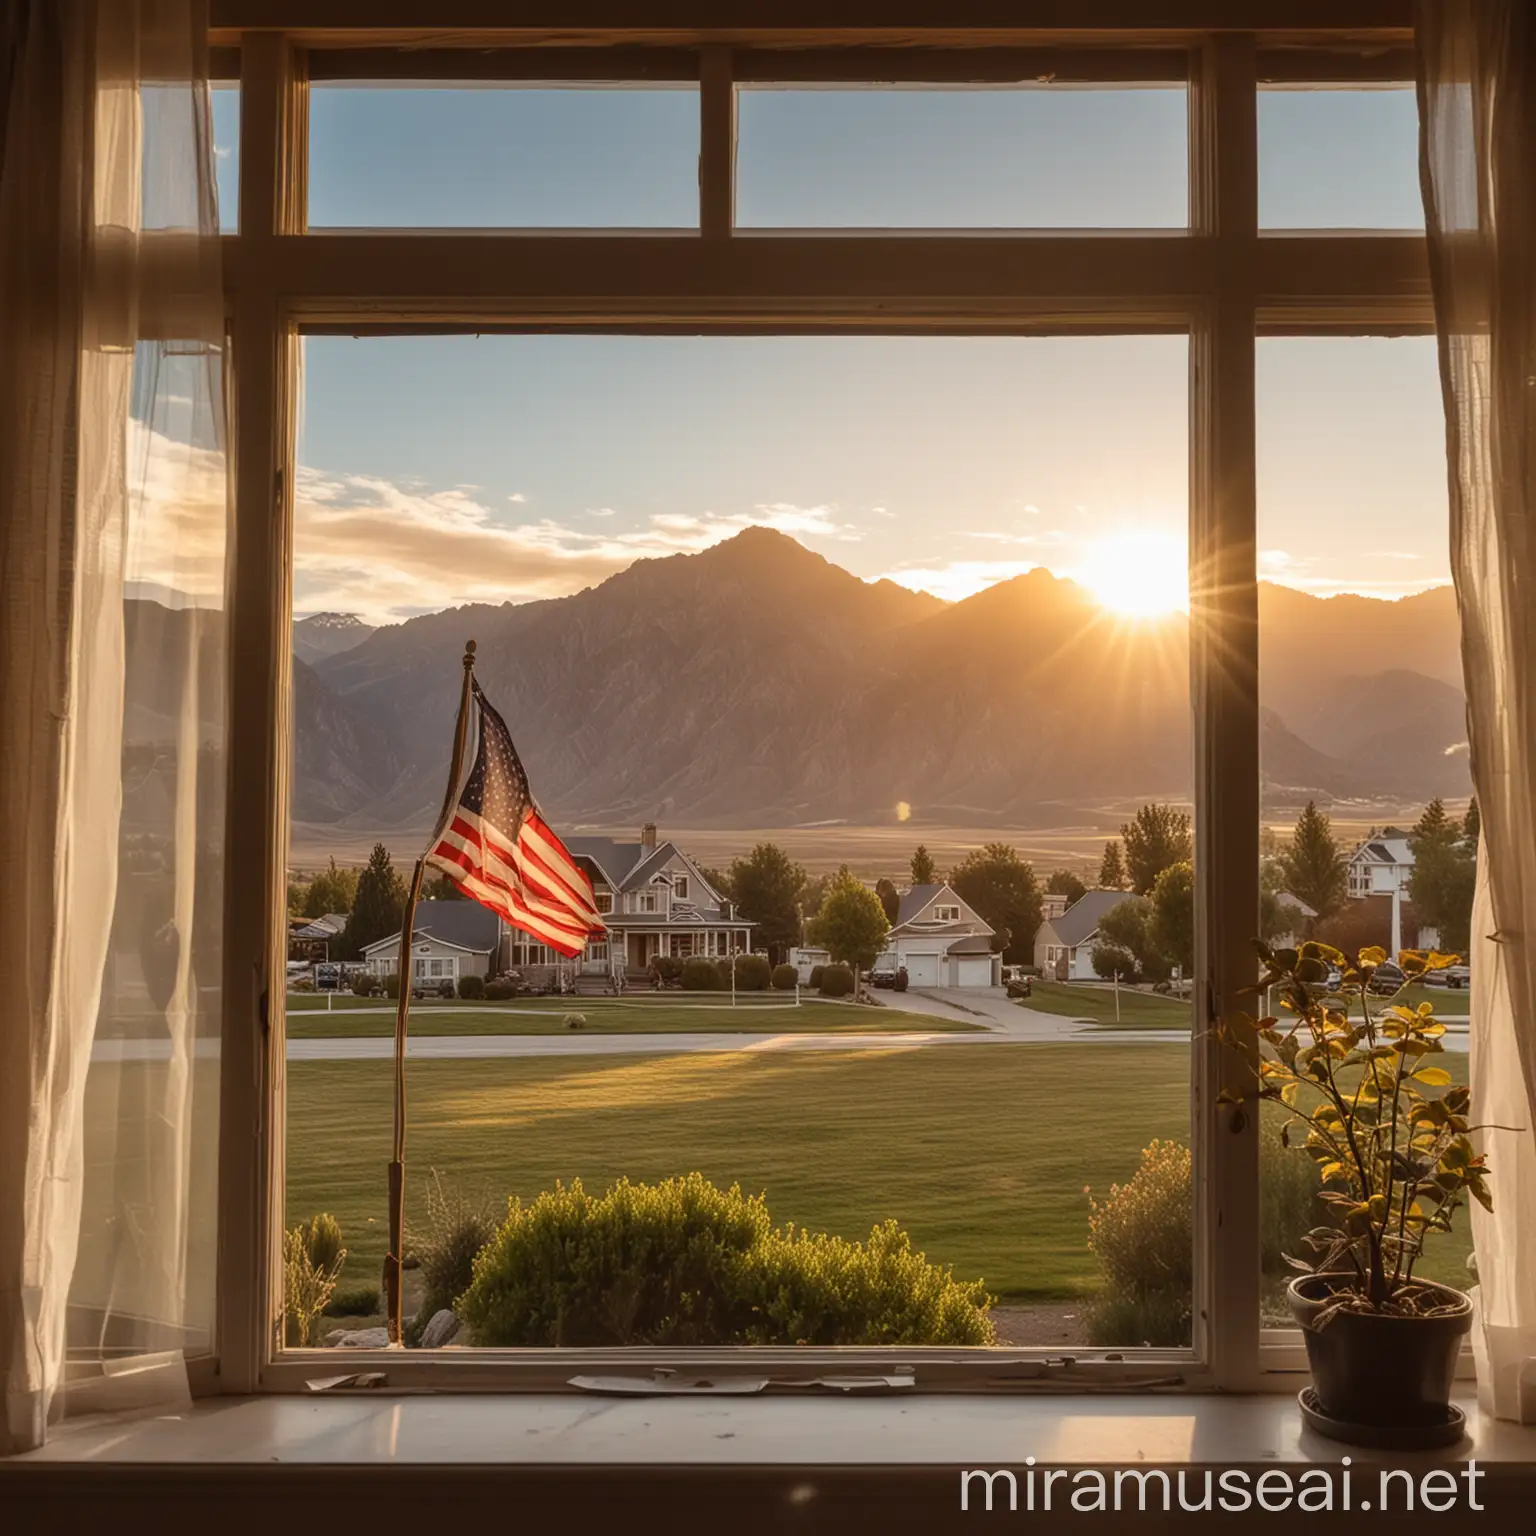 view from the window of a house to an American house with an American flag in front with huge mountains in the background at sunrise with the golden sun shining on them very beautiful